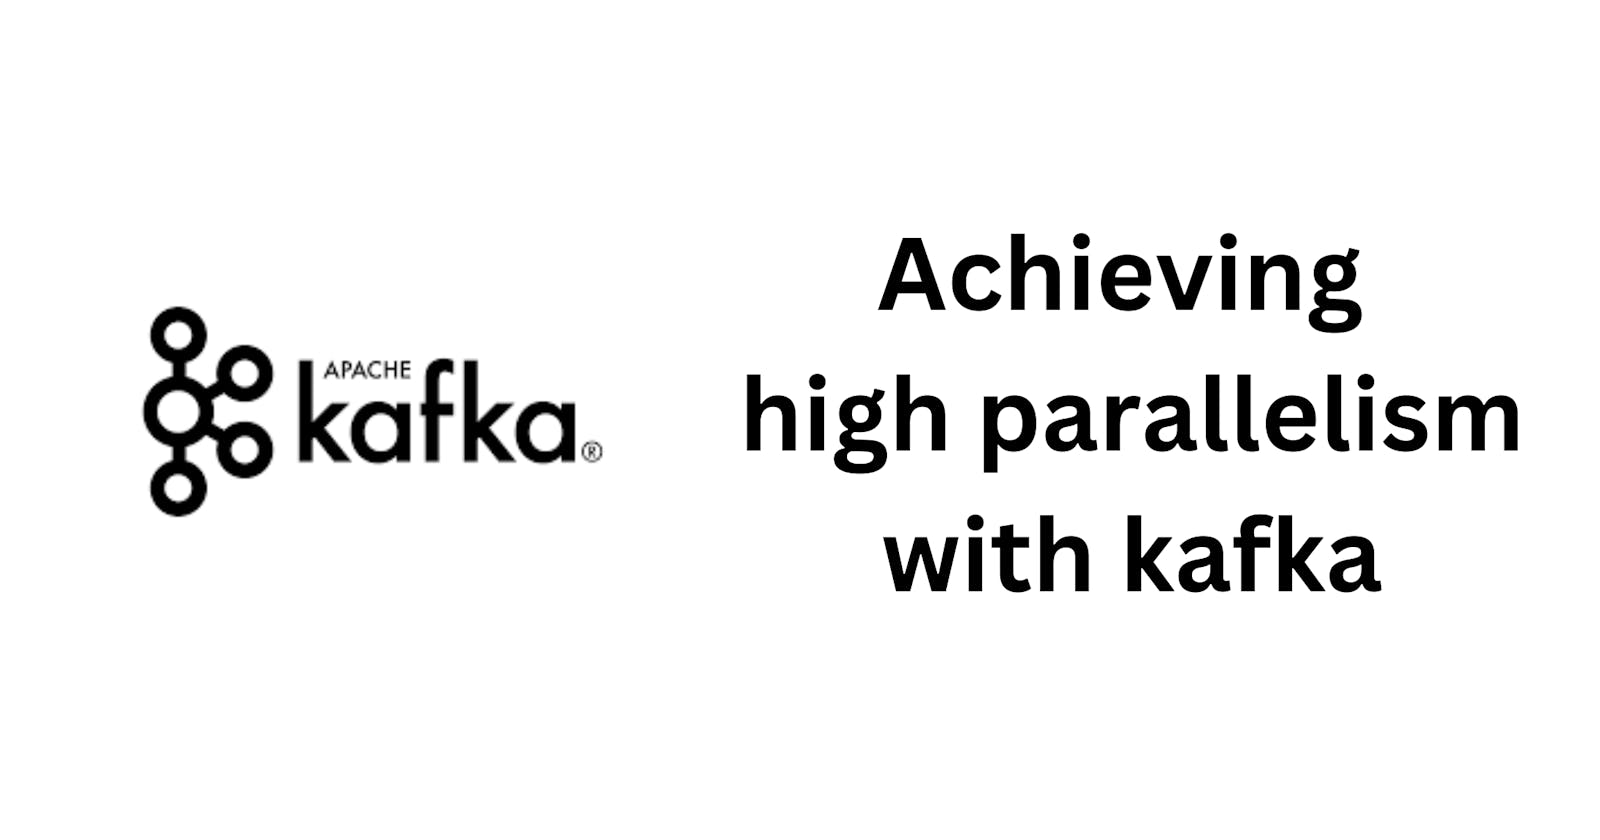 Achieving high parallelism with kafka